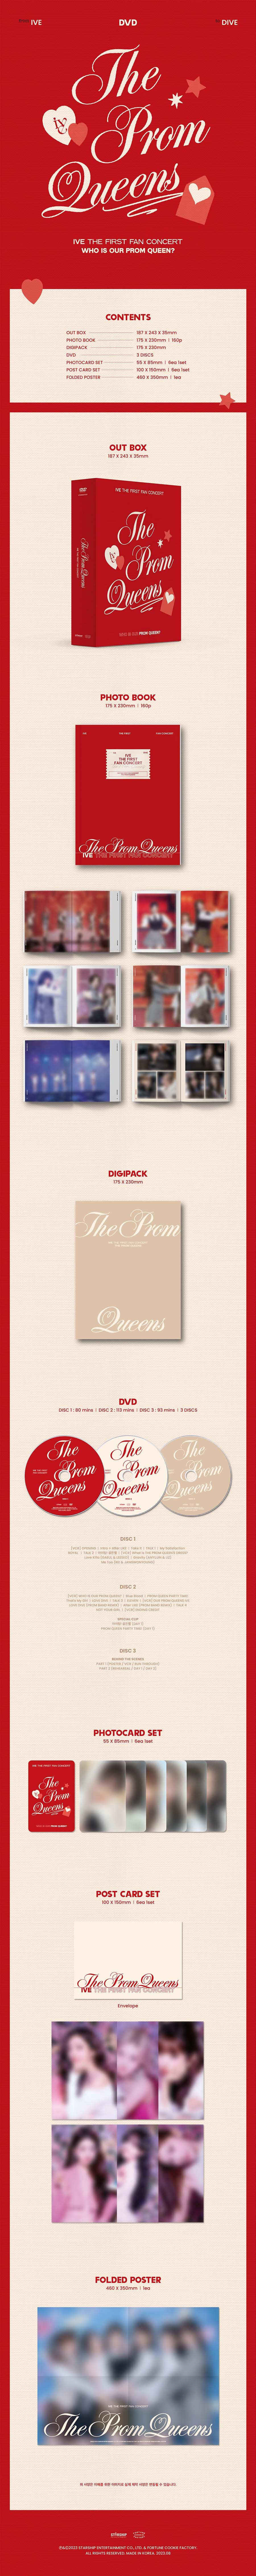 ( Dvd ) IVE - THE FIRST FAN CONCERT [The Prom Queens] IVE_dvd IVE_kit IVE_bluray IVE_fancon The_Prom_Queens